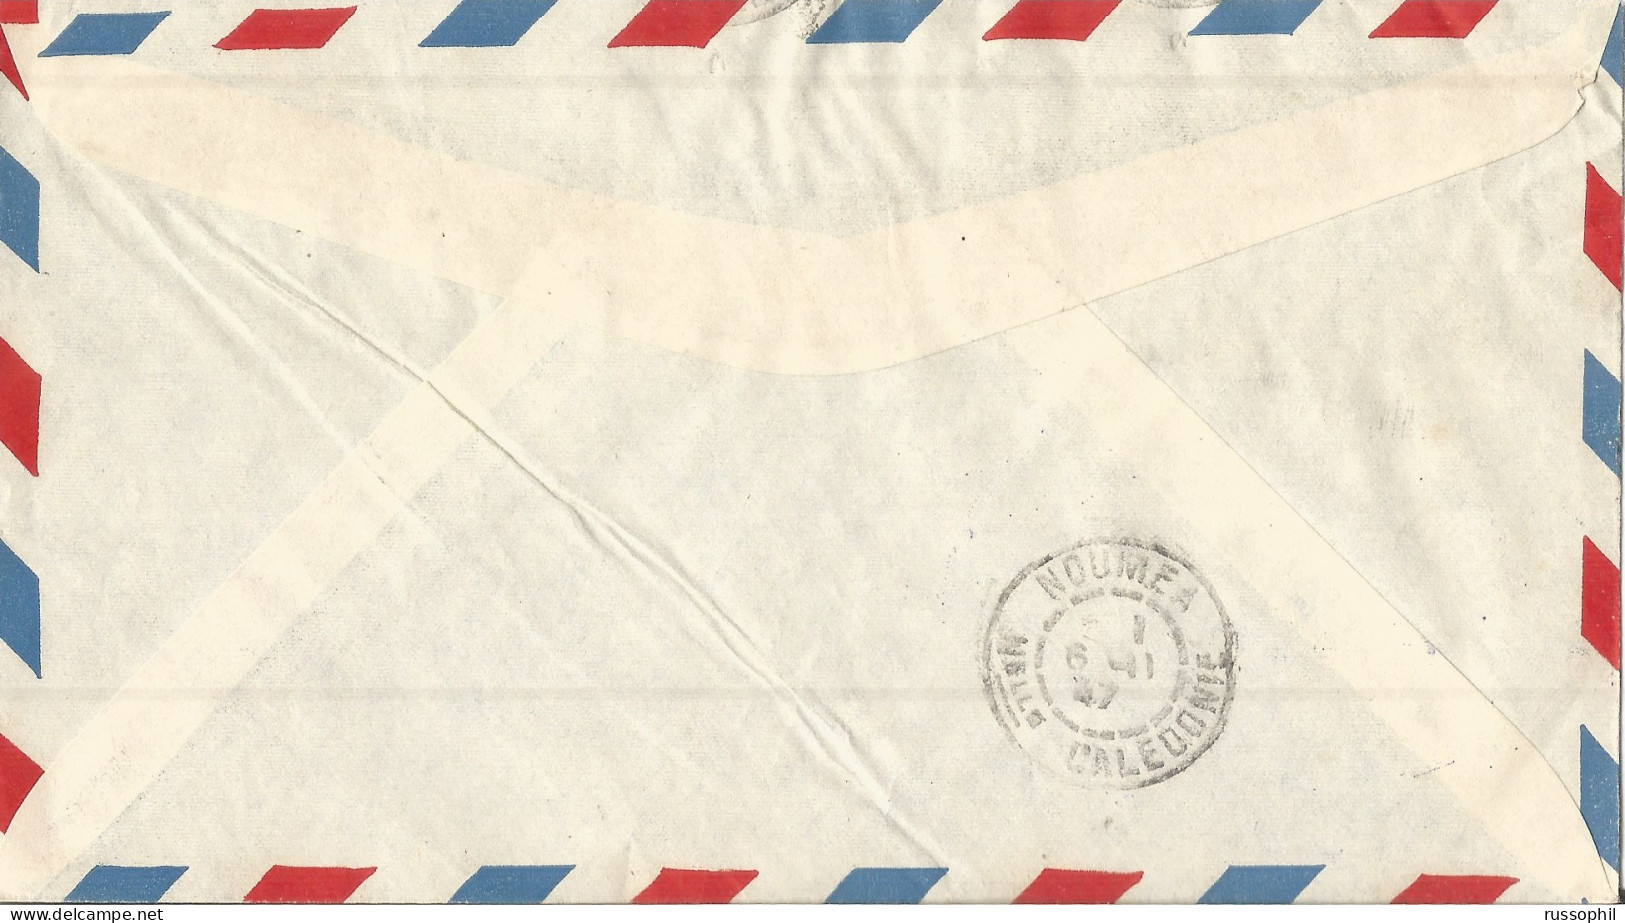 OCEANIE -  TRAPAS - 3 FR. FRANKING ON AIR COVER FROM PAPEETE TO NEW CALEDONIA - RETURNED TO SENDER - 1947 - Briefe U. Dokumente